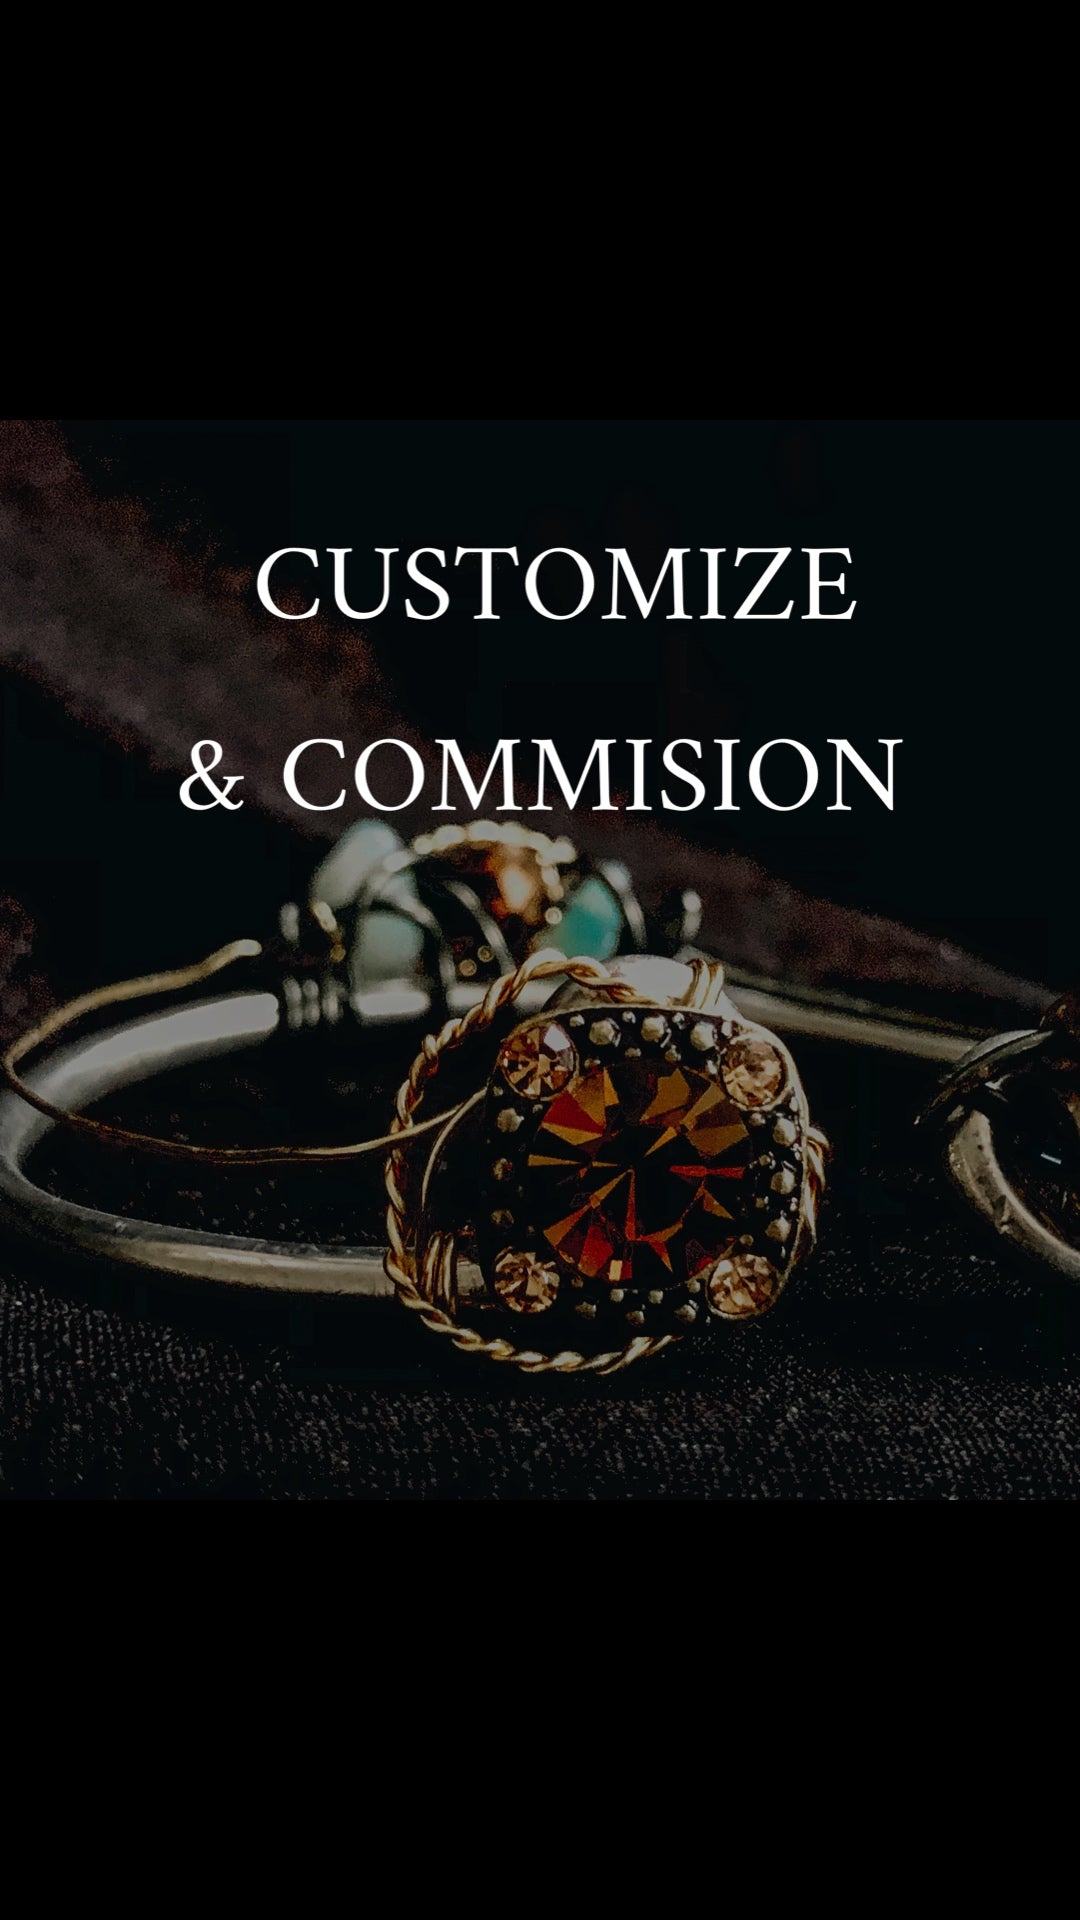 Customize & Commission